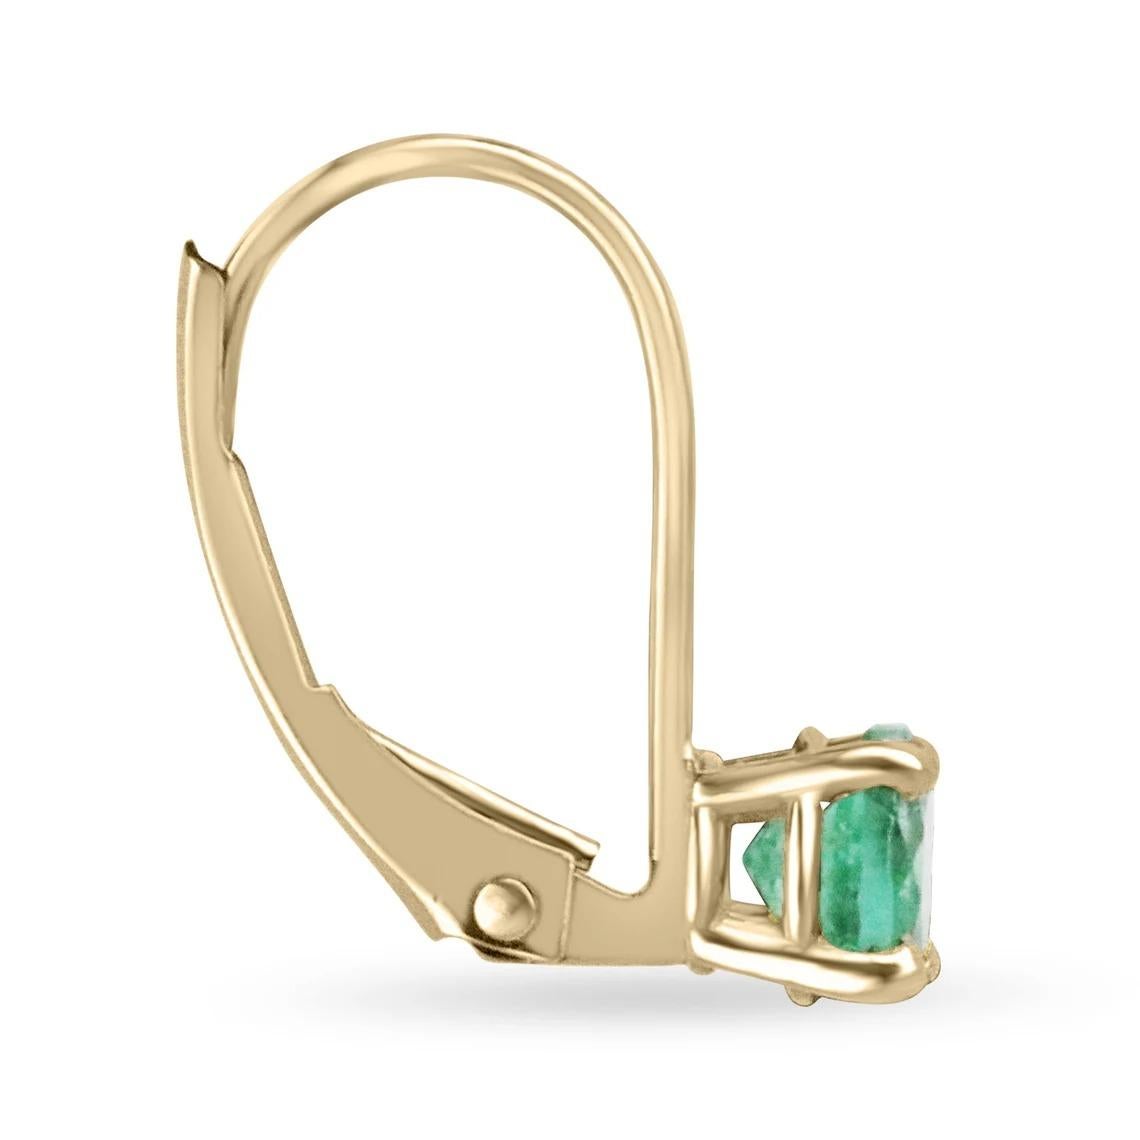 An everyday pair of round-cut-emerald lever back earrings made in 14K yellow gold. The chic pair of lever-back earrings feature green, natural emeralds. The emeralds have beautiful eye clarity and are simply vivacious! The emeralds display minor